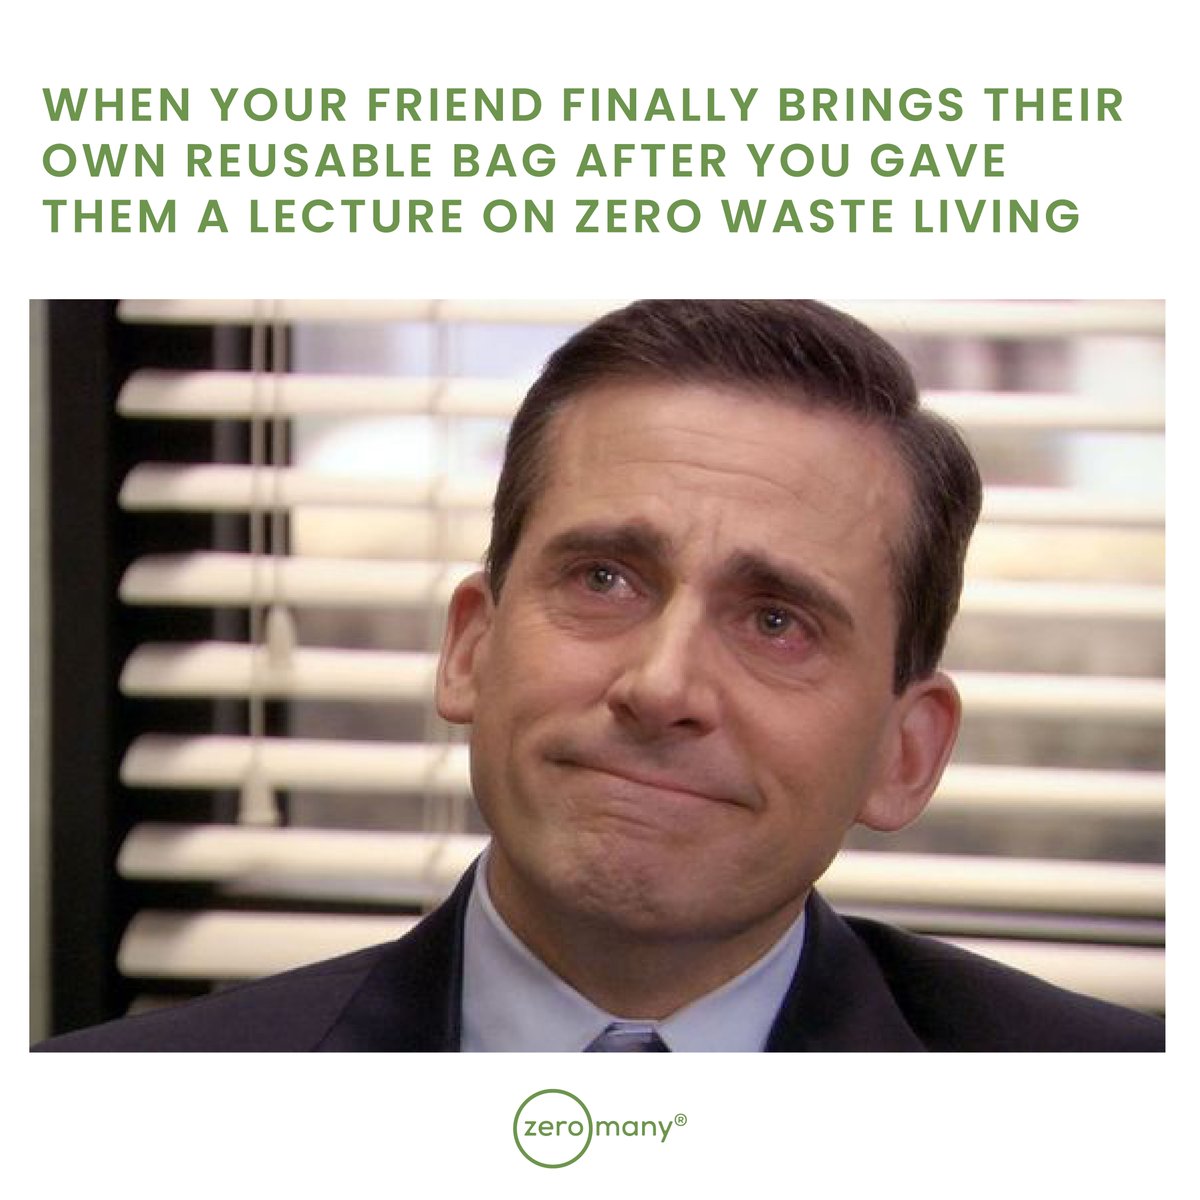 Being aggressively passionate about the planet's future has finally paid off.😉

#ditchplastic #plasticfreeoceans #reducereuserecycle #ecofriendlylifestyle #savetheplanetearth #zerowastegoals #environmentallyconscious #greenmatters #gogreen #ecowarriors #ecolifestyle #ecomemes